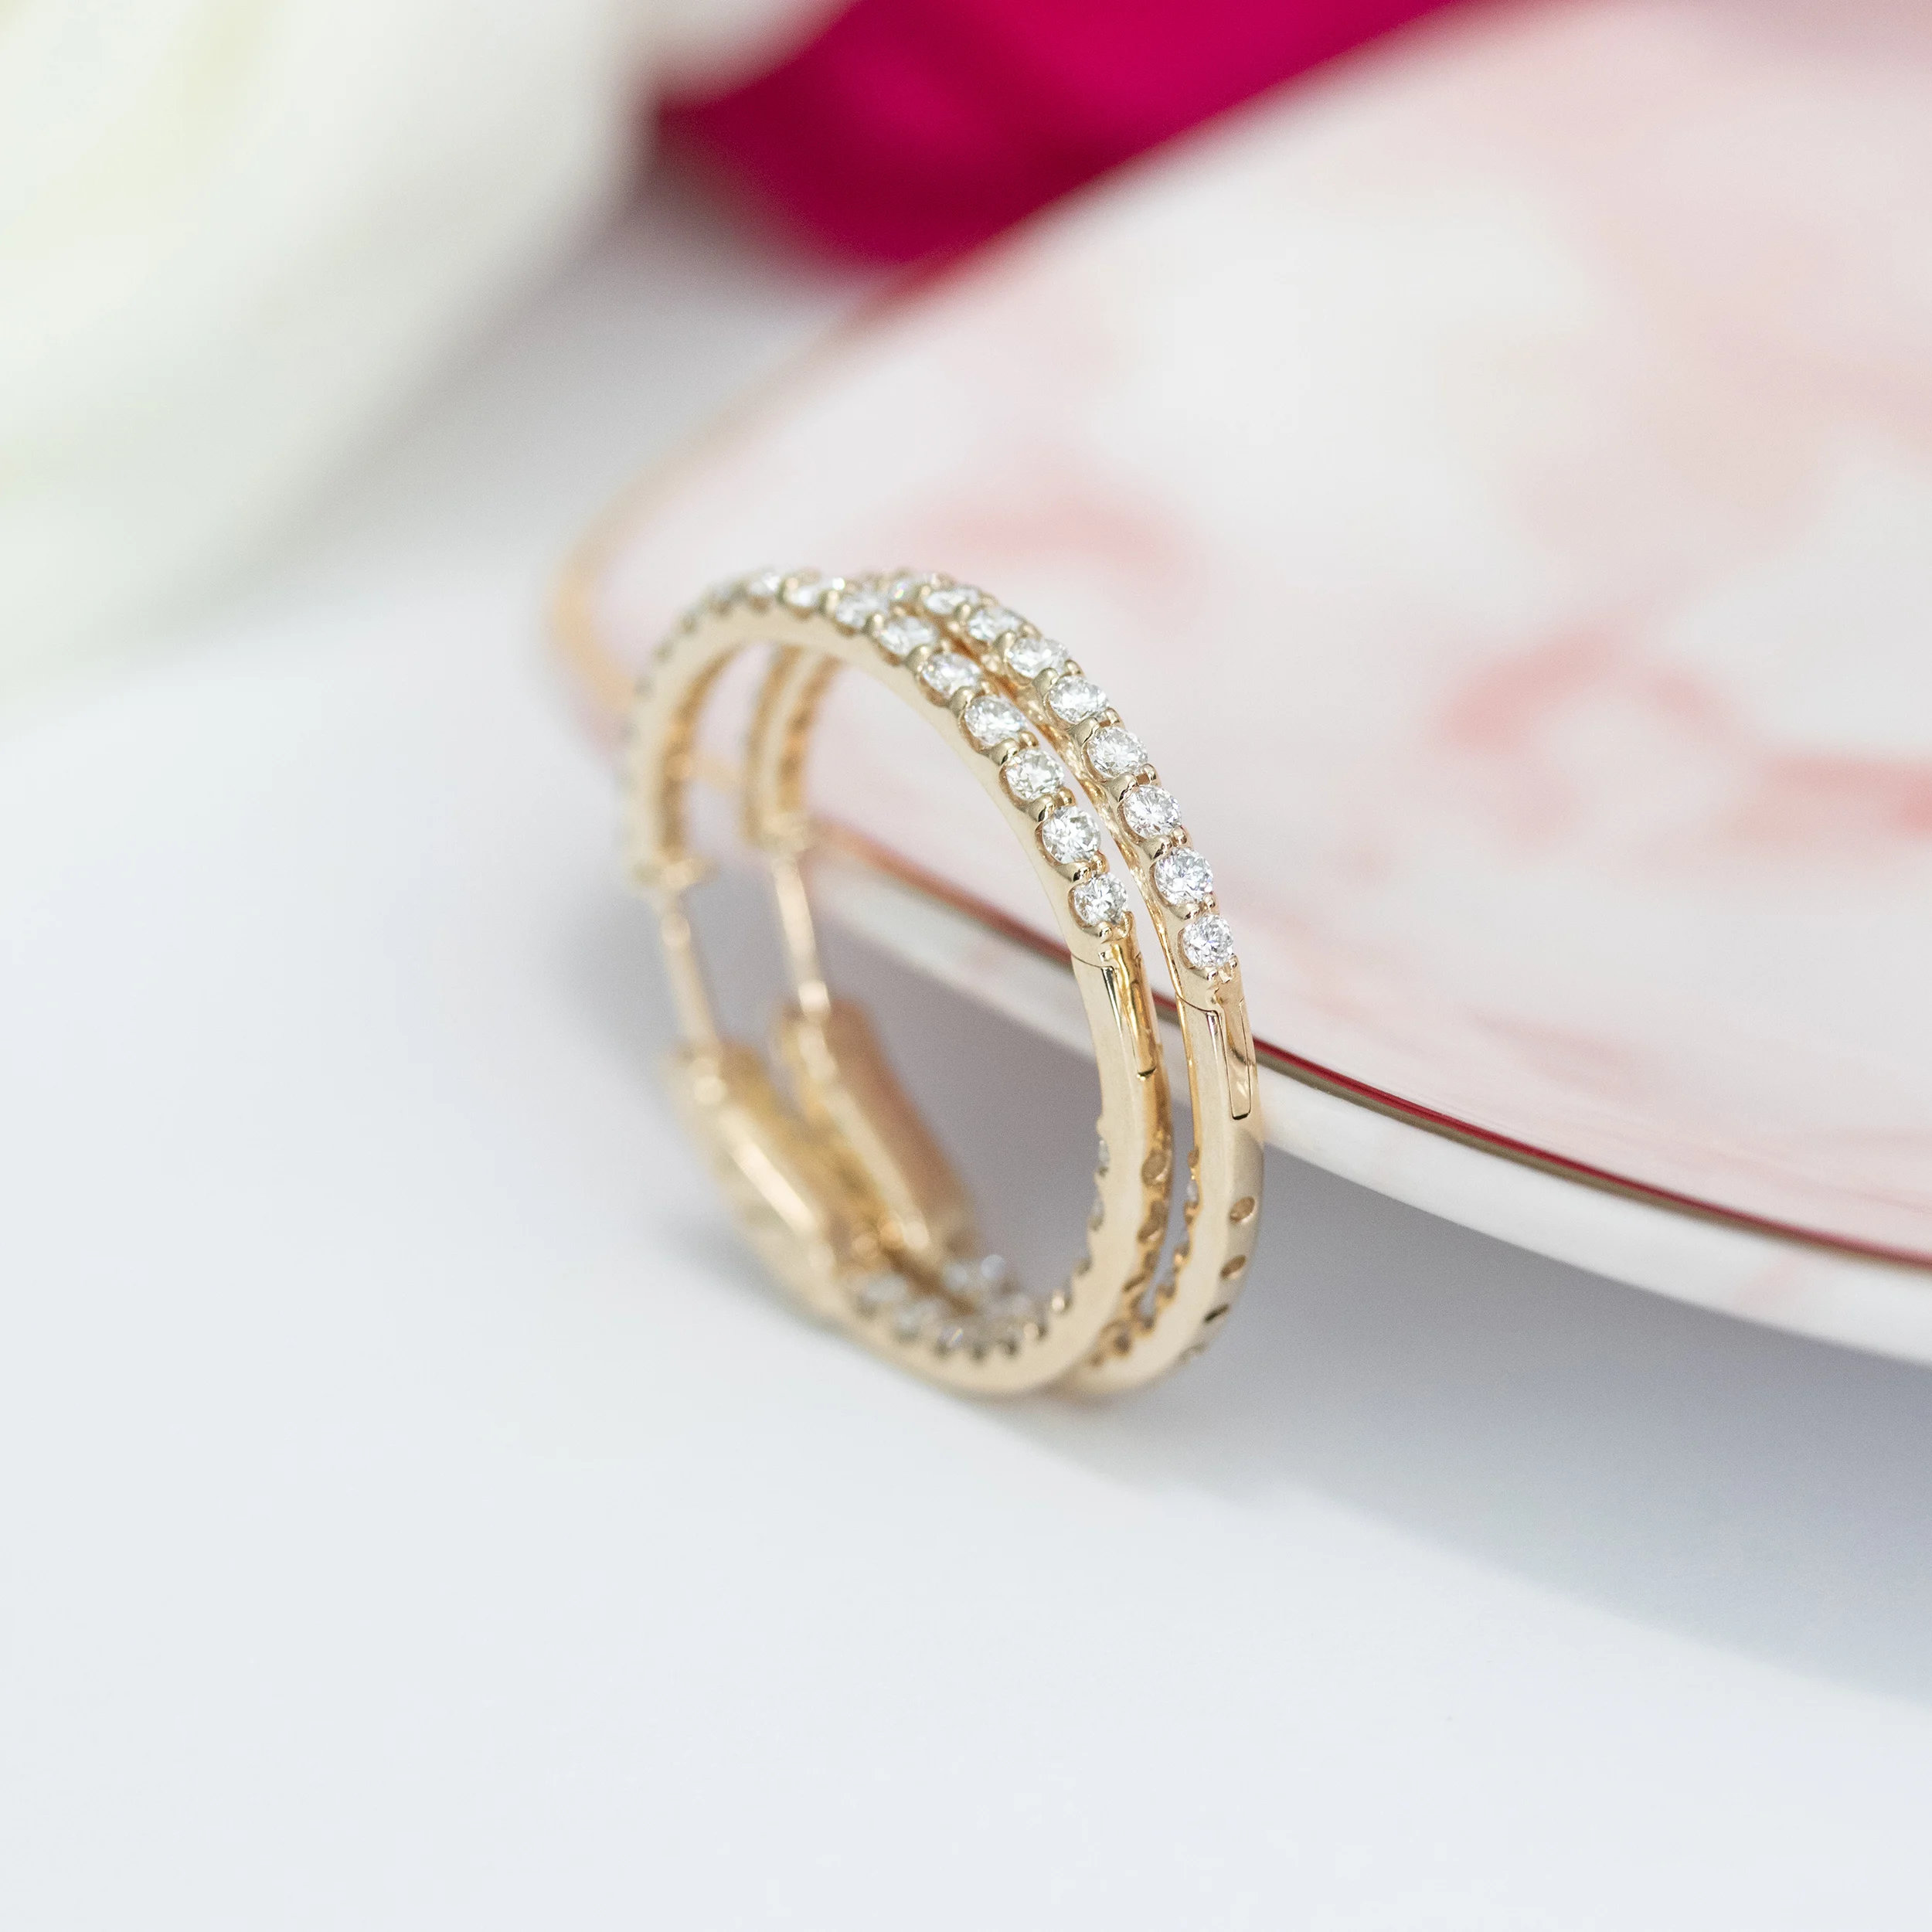 14 Karat Yellow Gold 1.75ctw Inside Out Diamond Hoop Earrings in 14k Yellow Gold featuring Hand Selected 1.75 ctw Round Diamonds (Profile View)